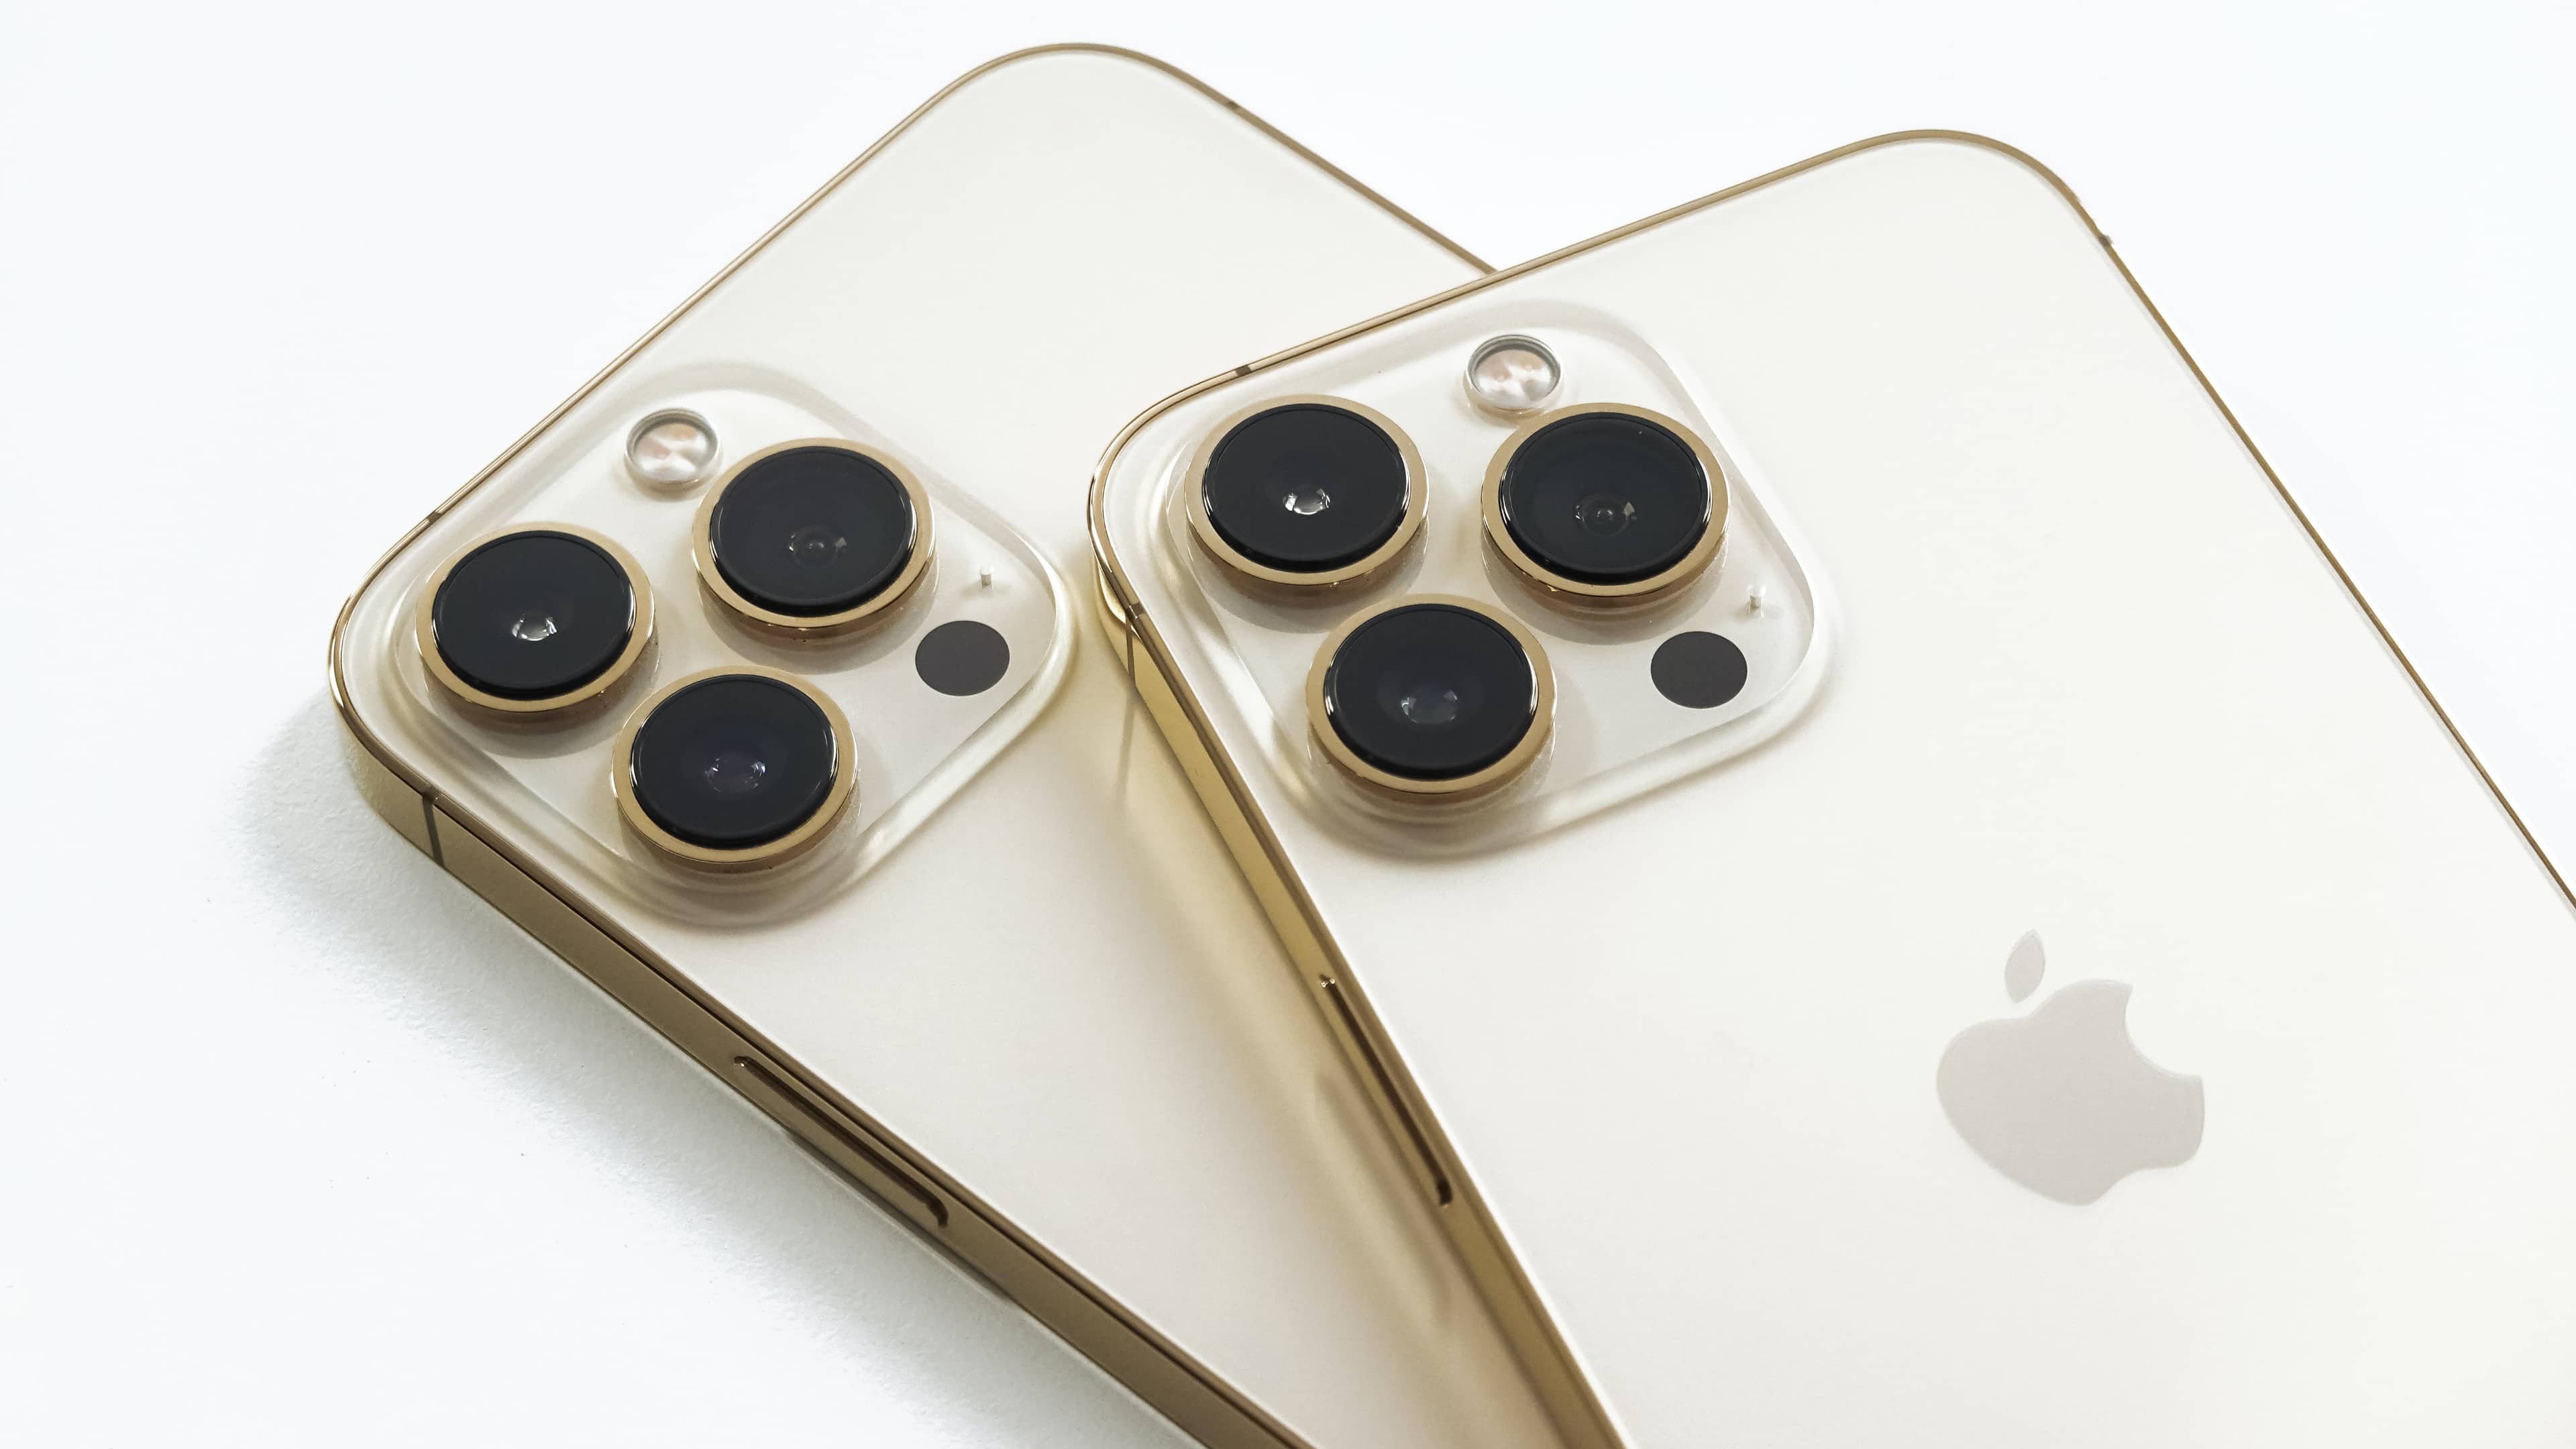 iPhone 13 Pro and iPhone 13 Pro Max laid facedown, showcasing their triple cameras on the back